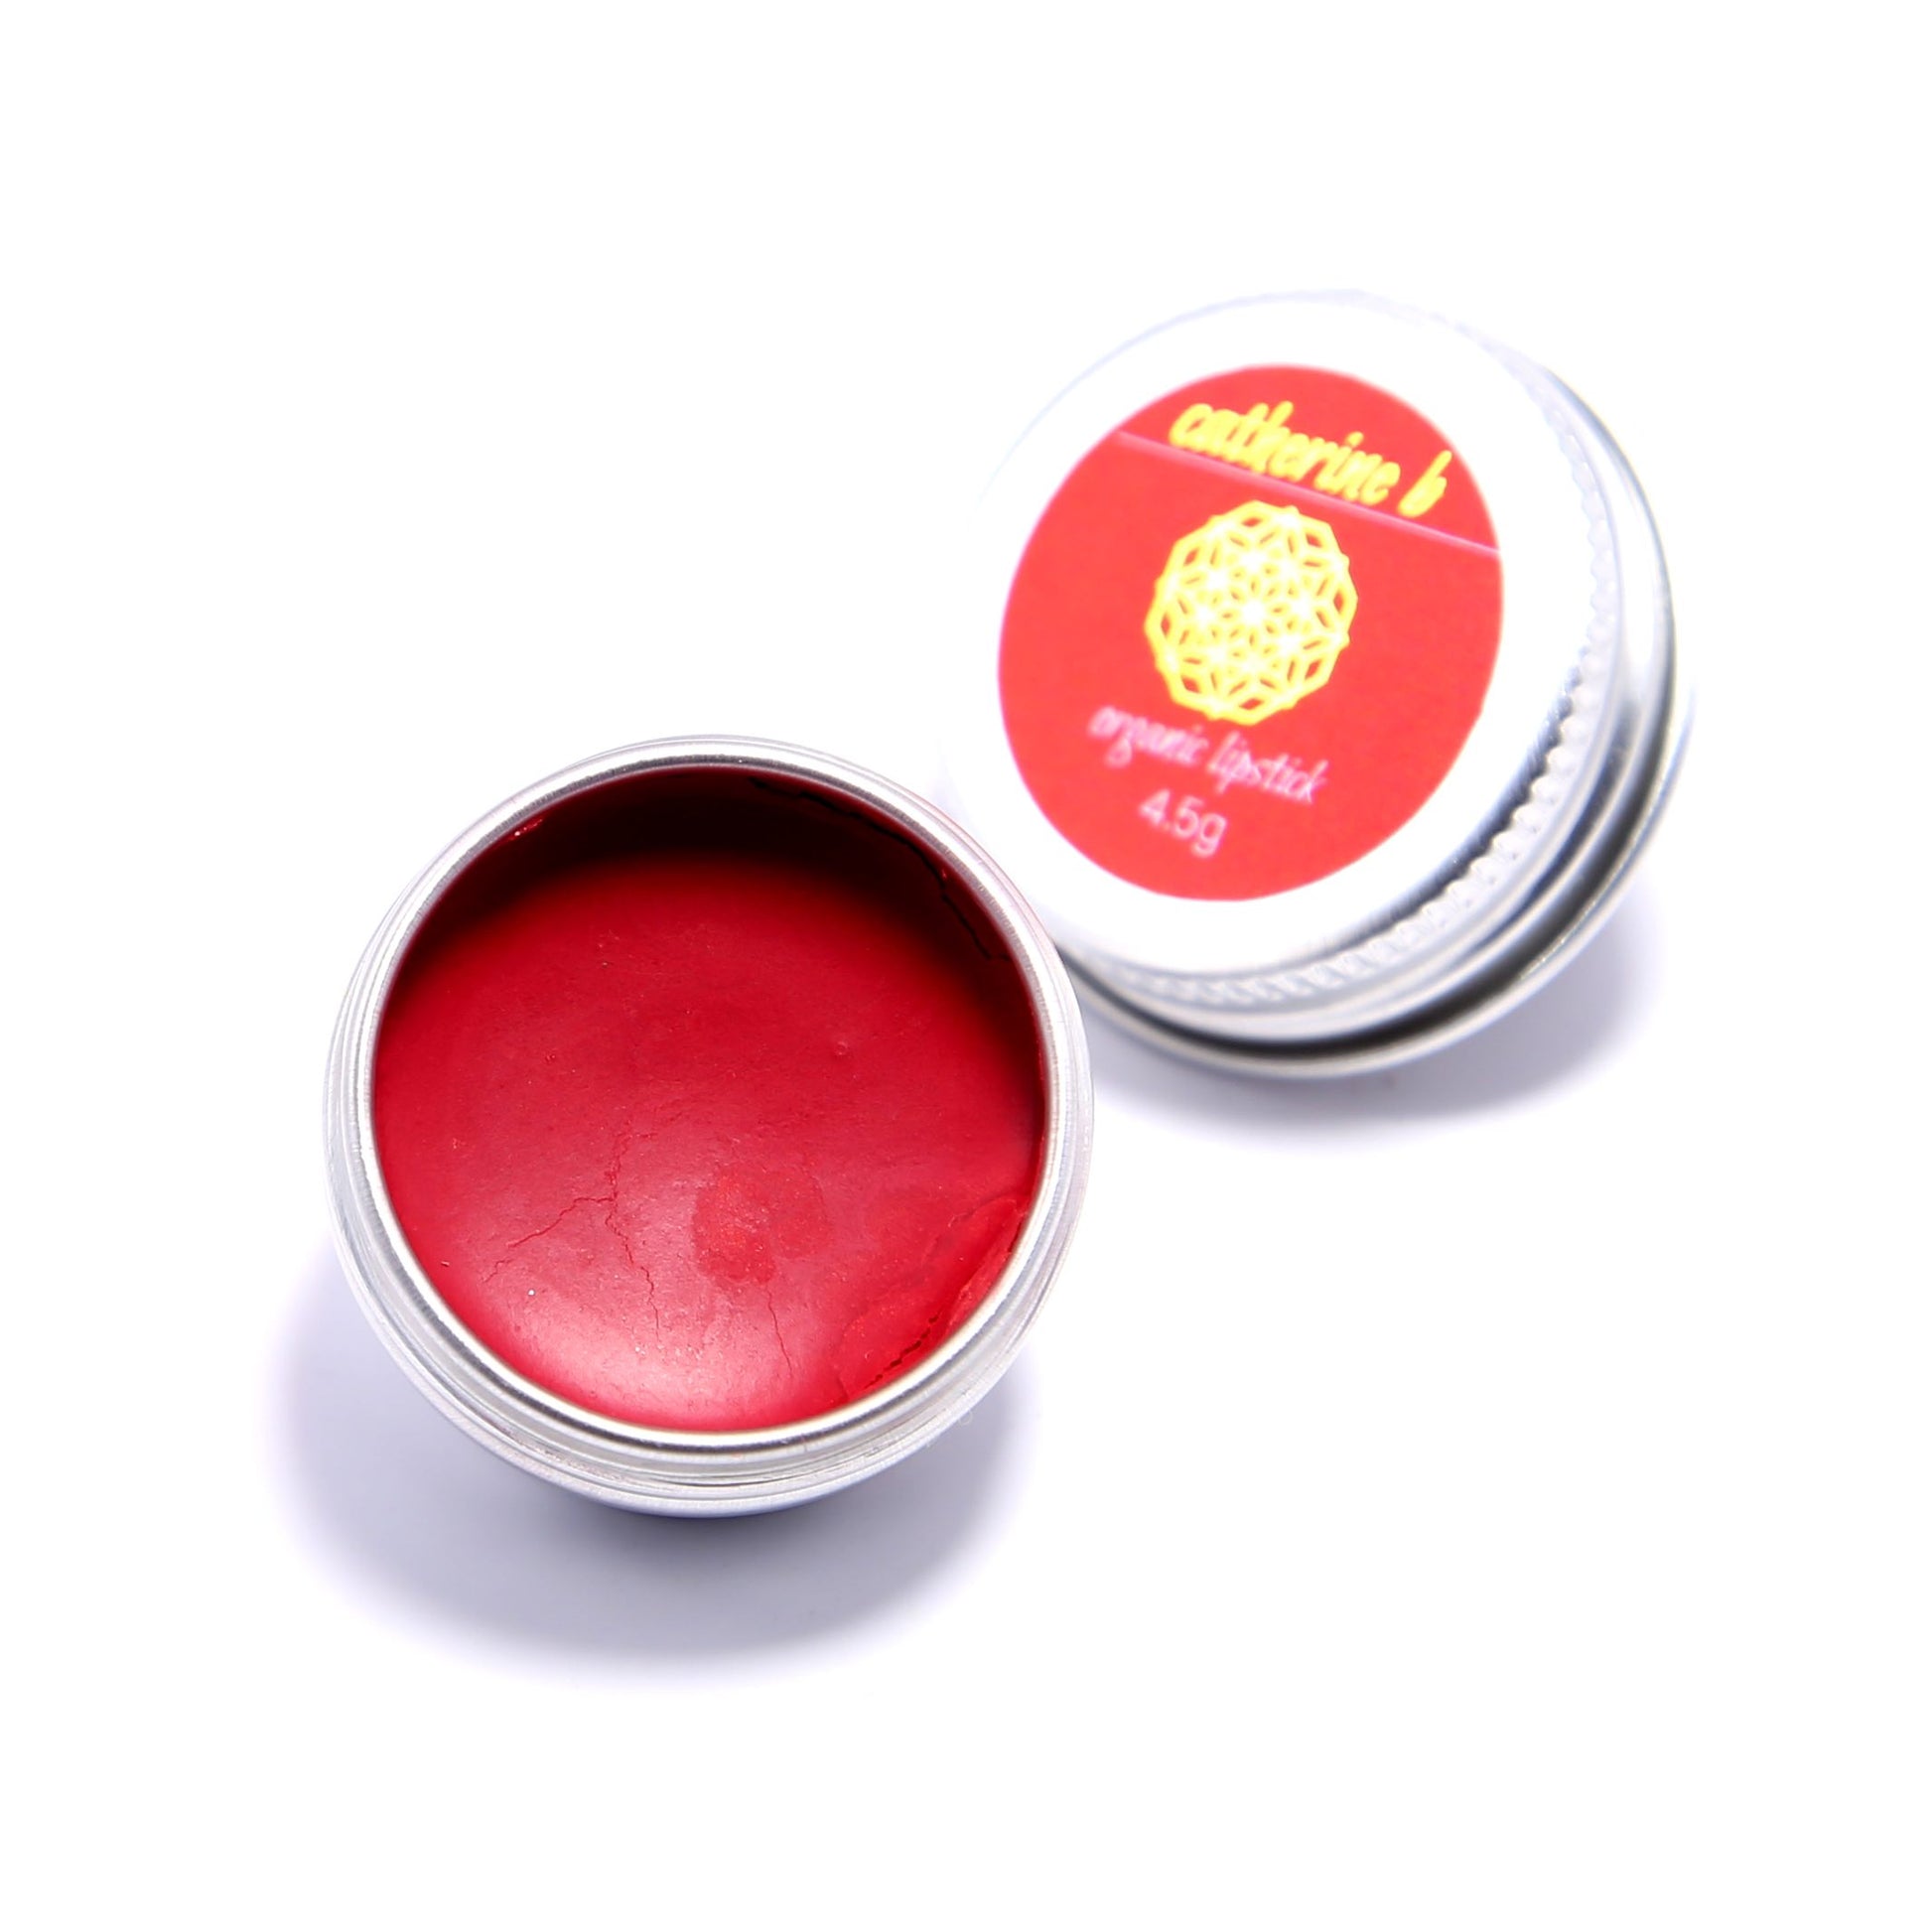 Berry Kissable - Vibrant Berry Pink Red Orange Organic Lipstick available in 4.5g tin